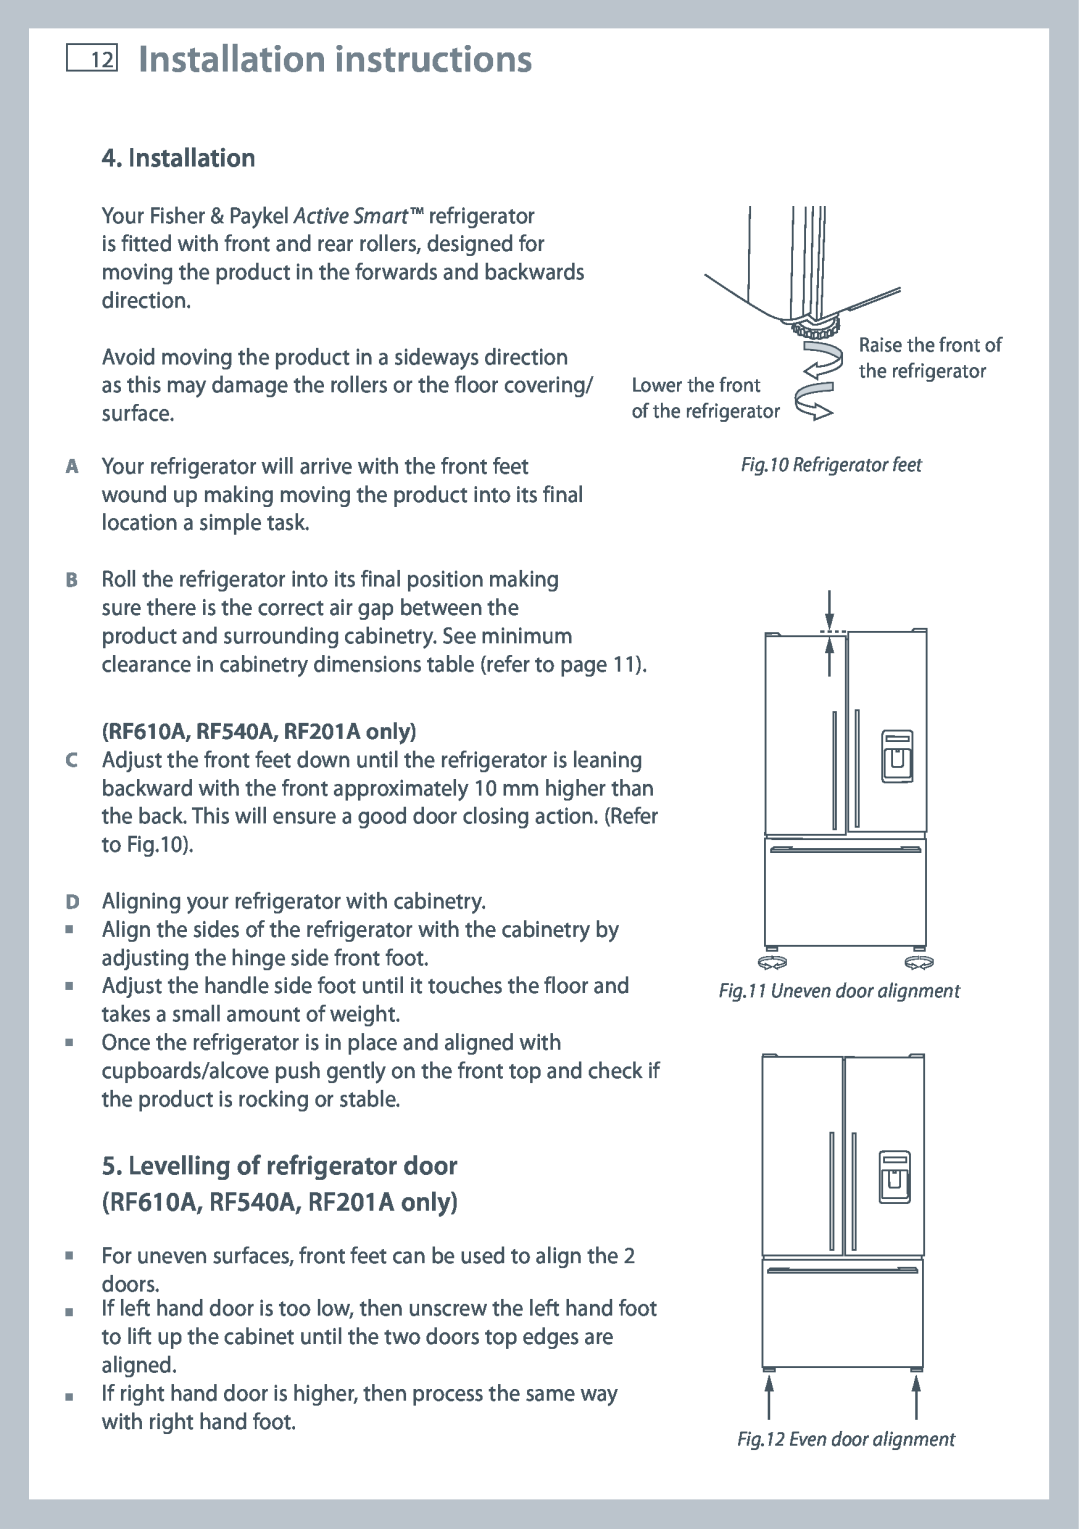 Fisher & Paykel installation instructions Installation instructions, RF610A, RF540A, RF201A only 